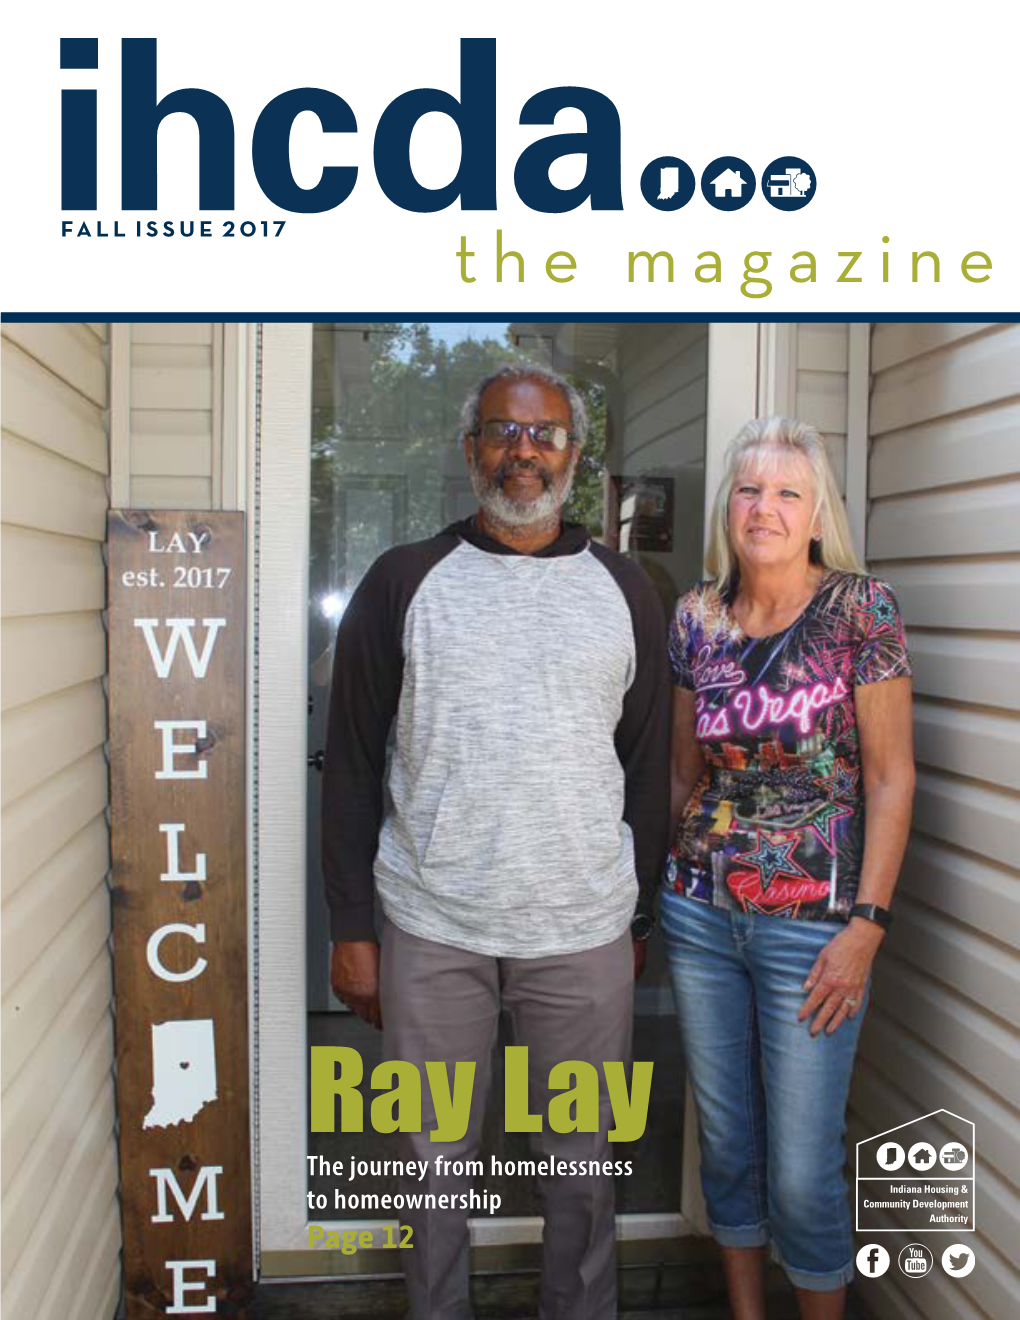 Ray Lay the Journey from Homelessness to Homeownership Page 12 the Magazine